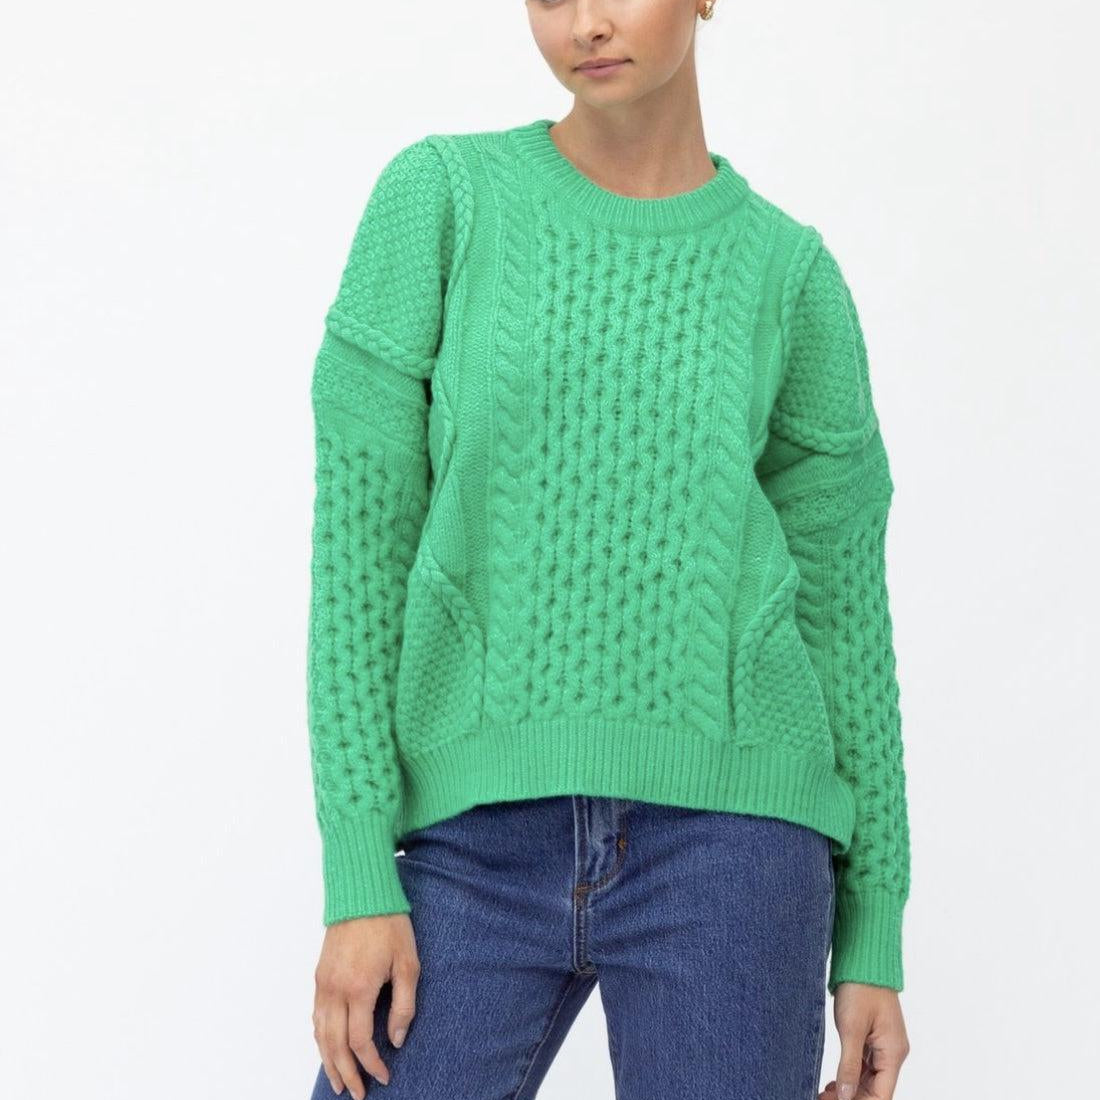 Braided Knit - Green-Not specified-Lot 39 Store & Cafe